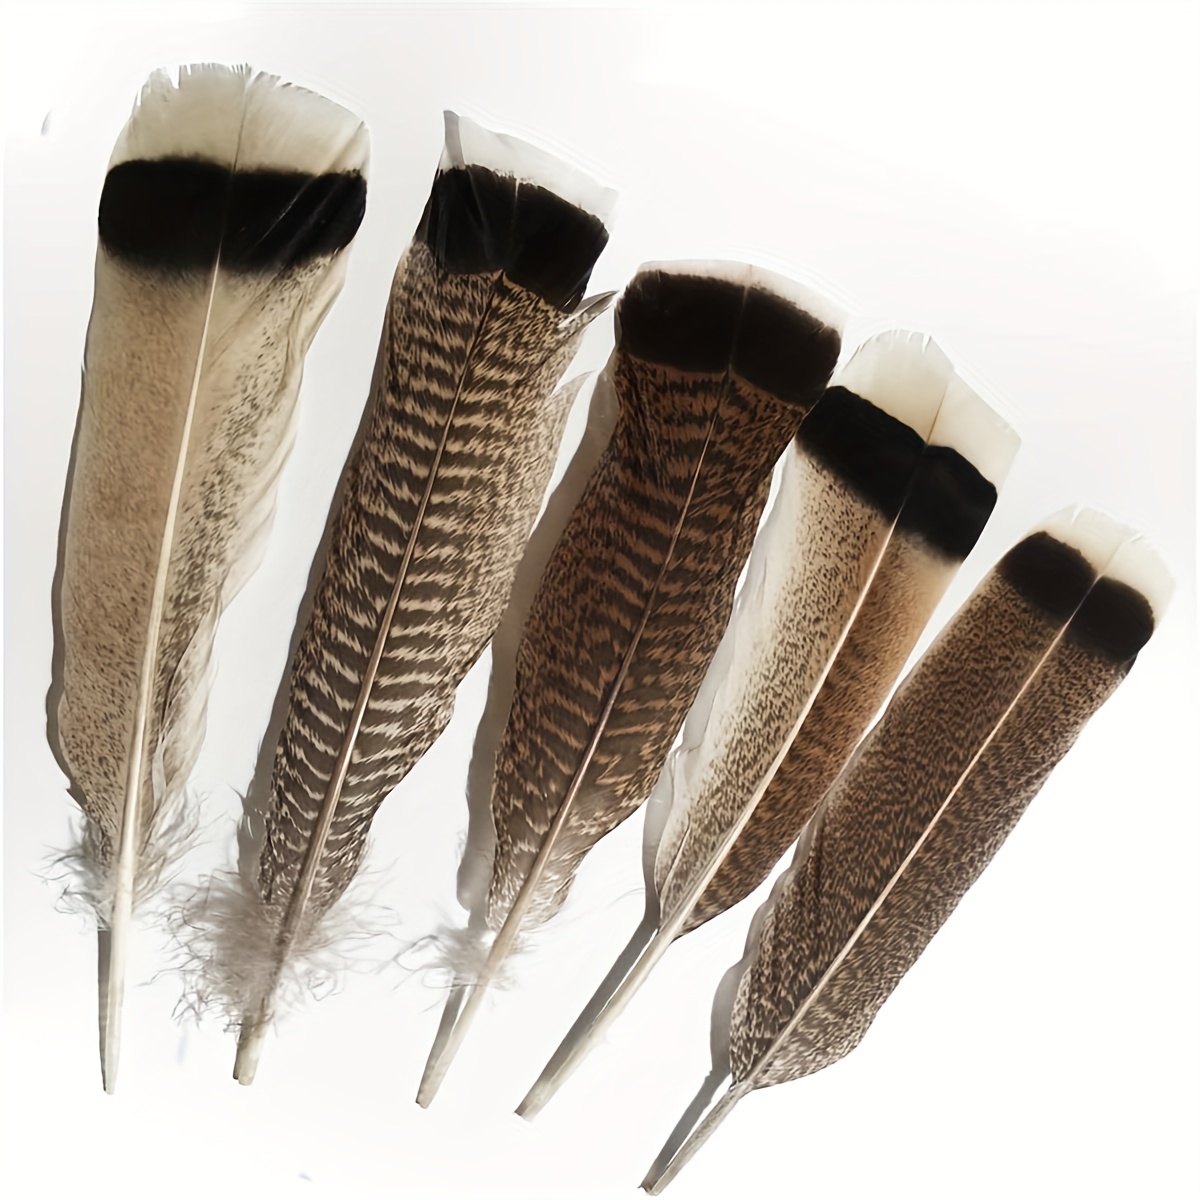 20pcs Wild Turkey Feathers Natural 8-10 inch Spotted Feathers for Craft Project Collection Wedding Decoration Headdress Clothing Accessories